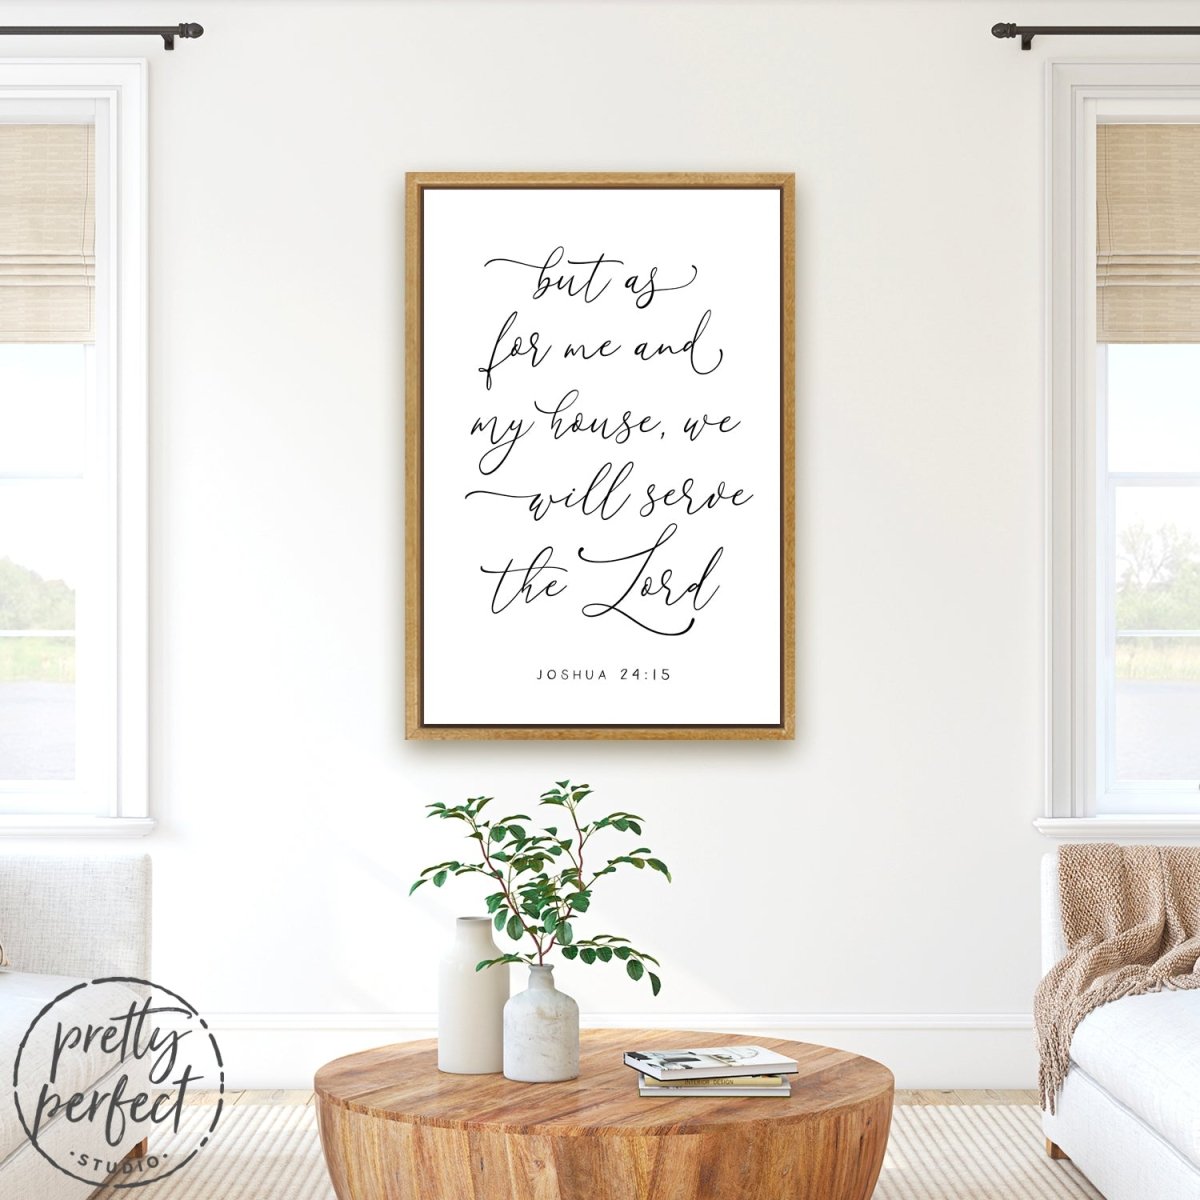 But As For Me And My House We Will Serve The Lord Canvas Sign Hanging on Wall in Living Room - Pretty Perfect Studio